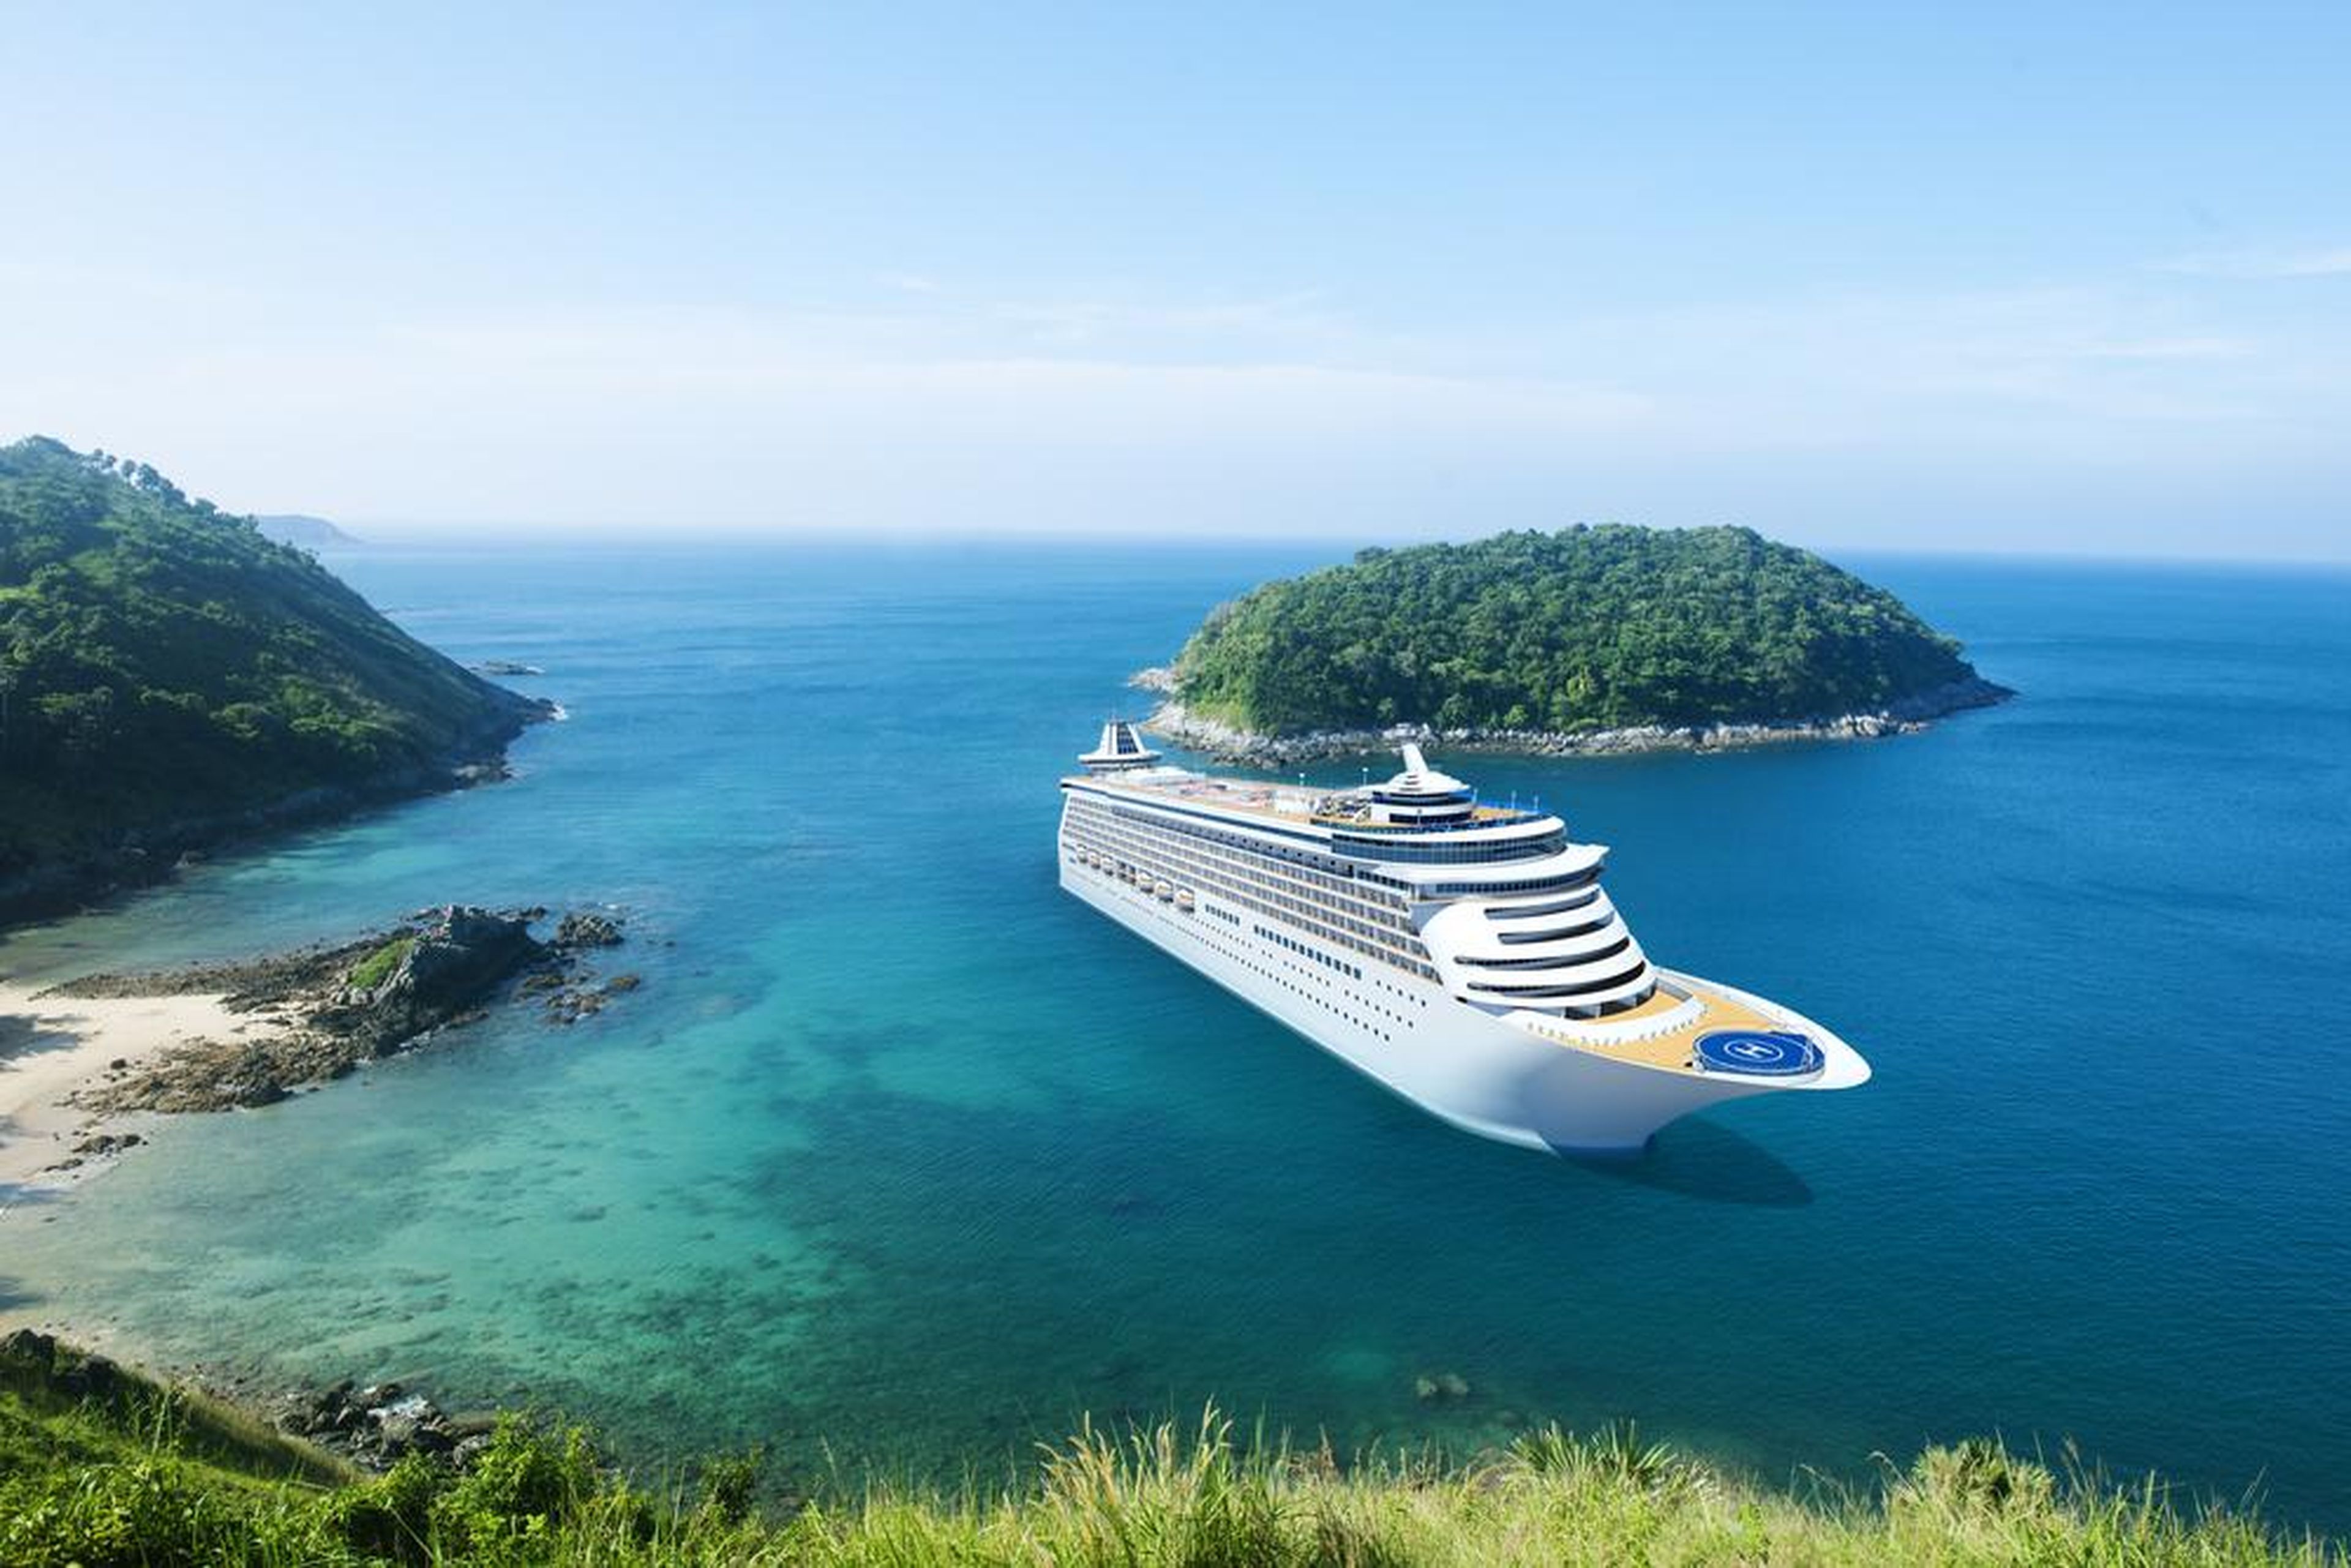 Cruises aren't always as perfect as they might seem.